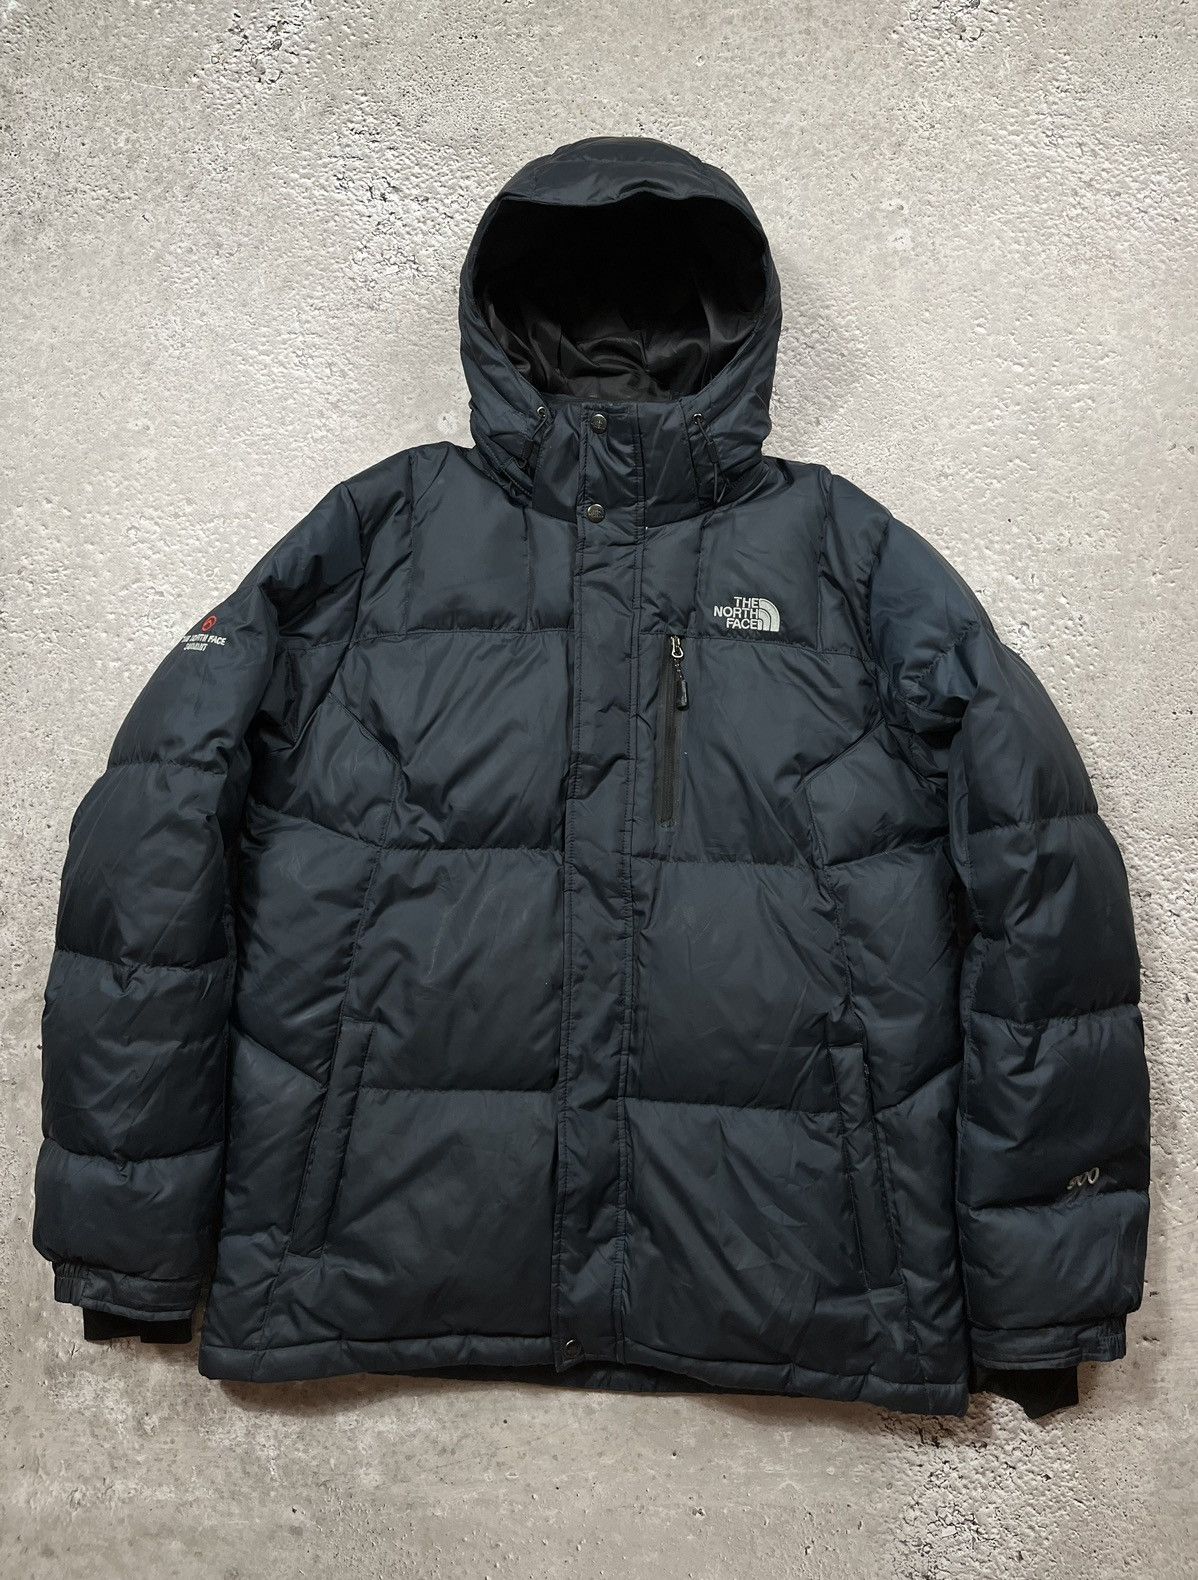 Vintage Vintage The North Face 900 Summit Series Puffer Jacket | Grailed